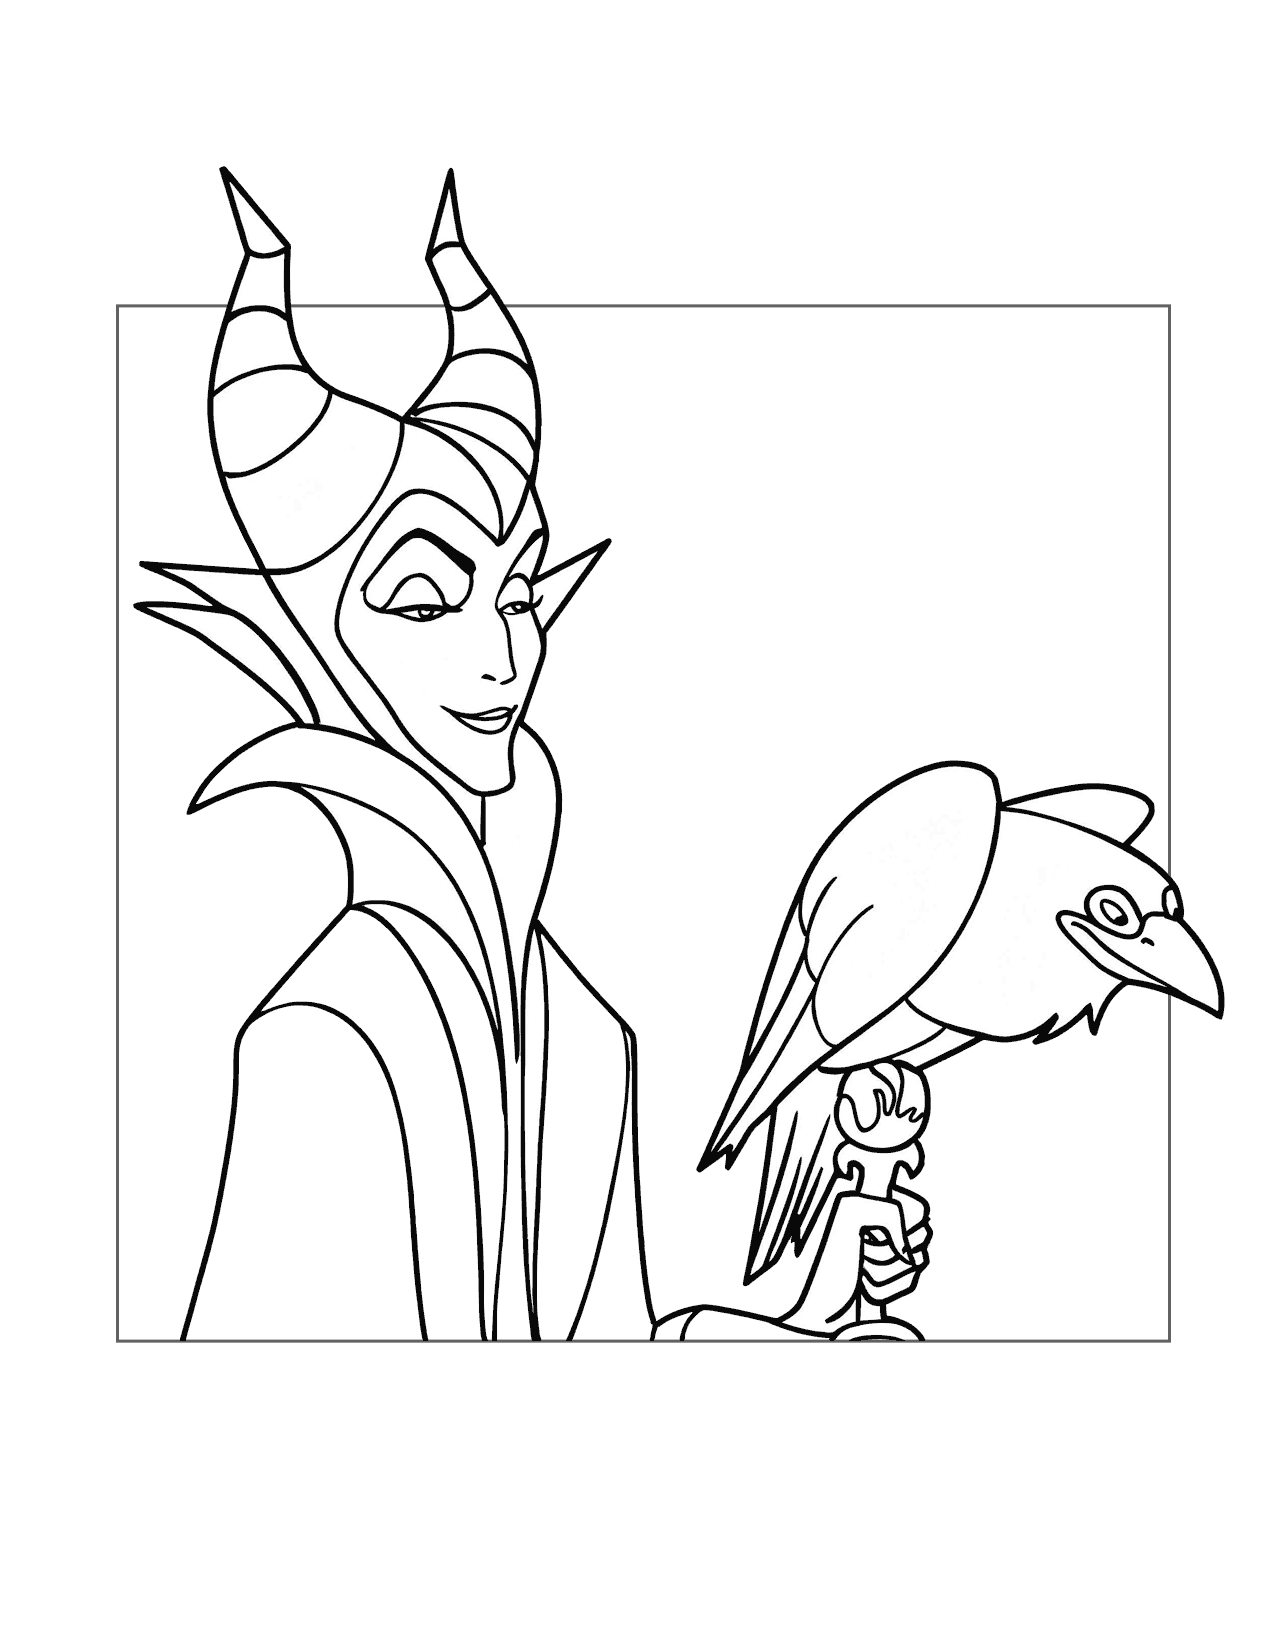 Maleficent And Her Raven Diablo Coloring Page